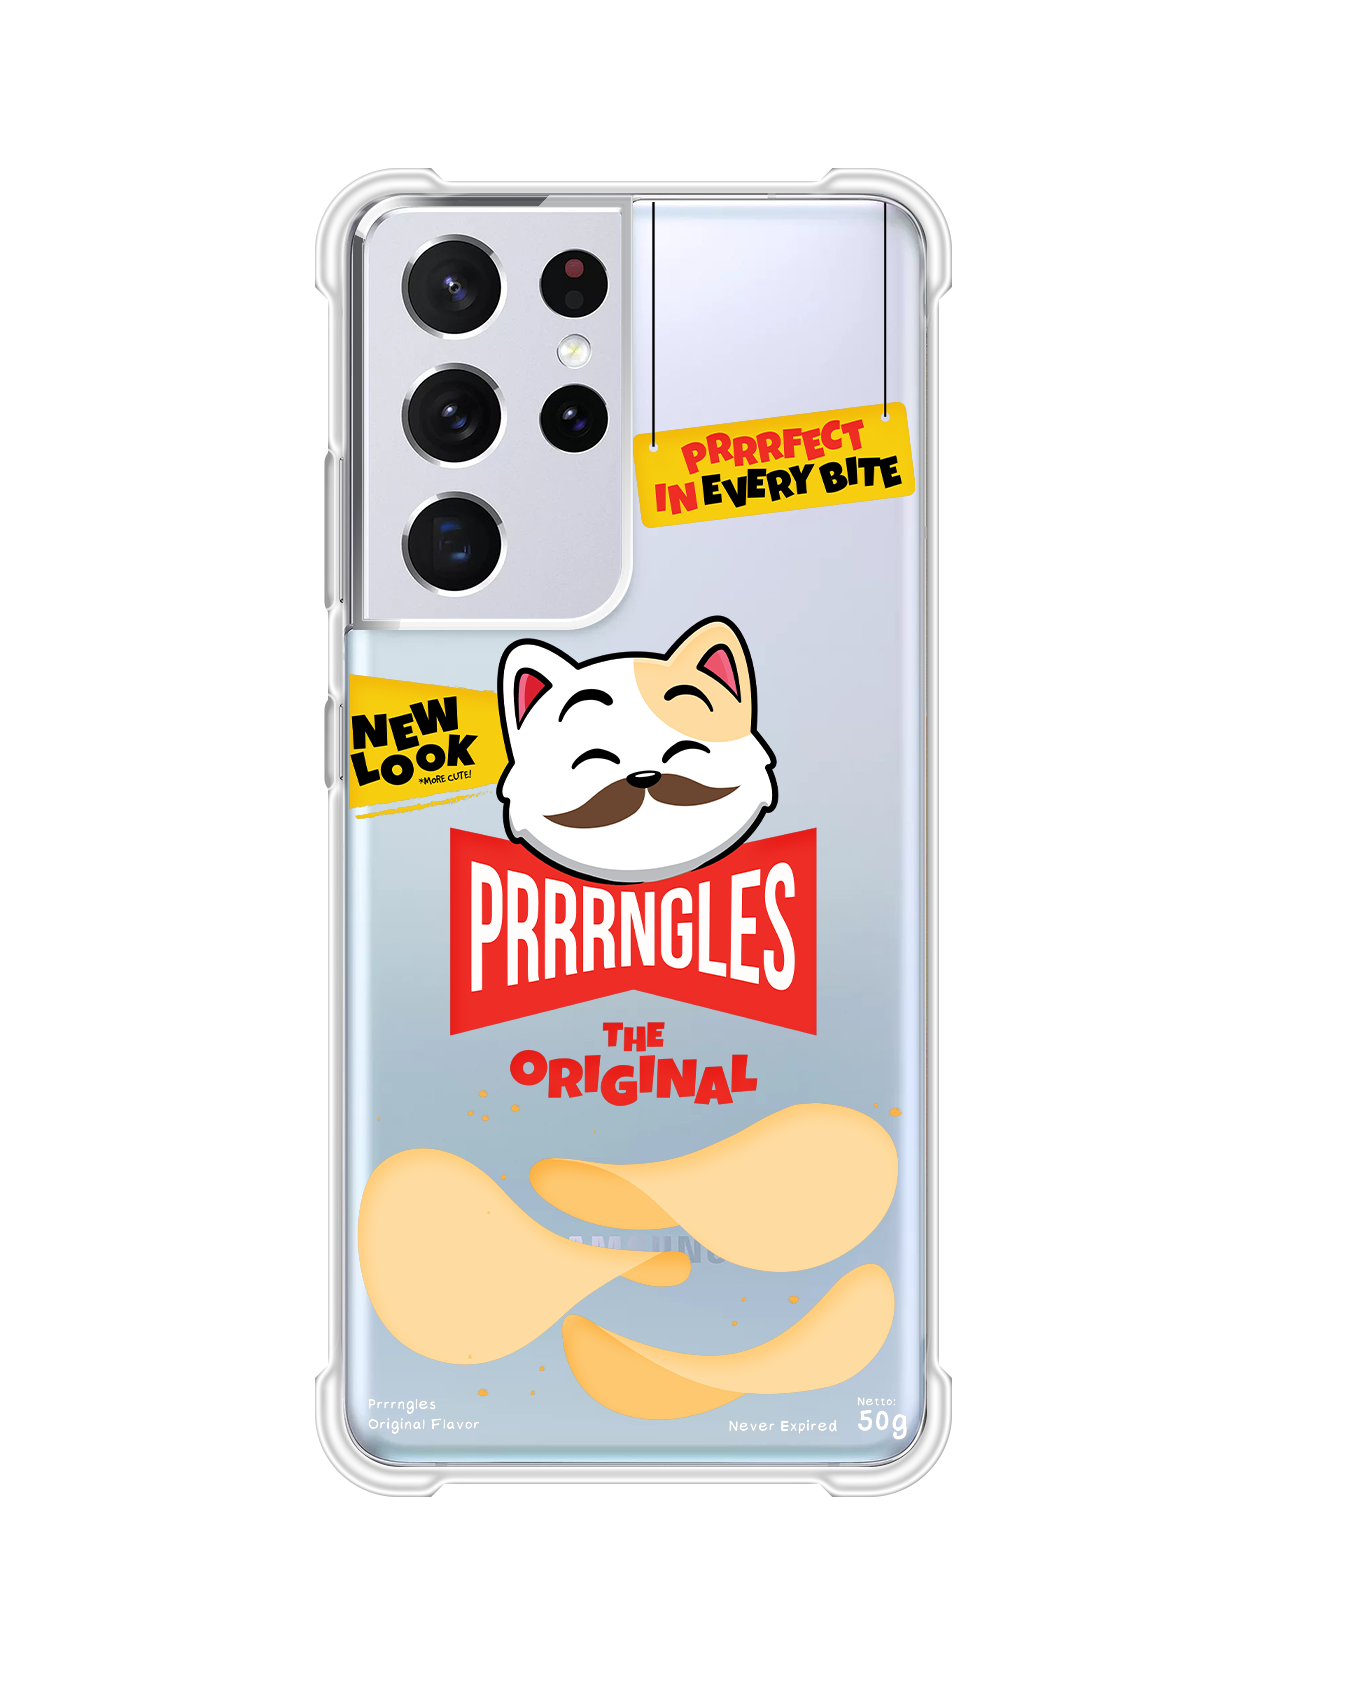 Android  - Prrrngles